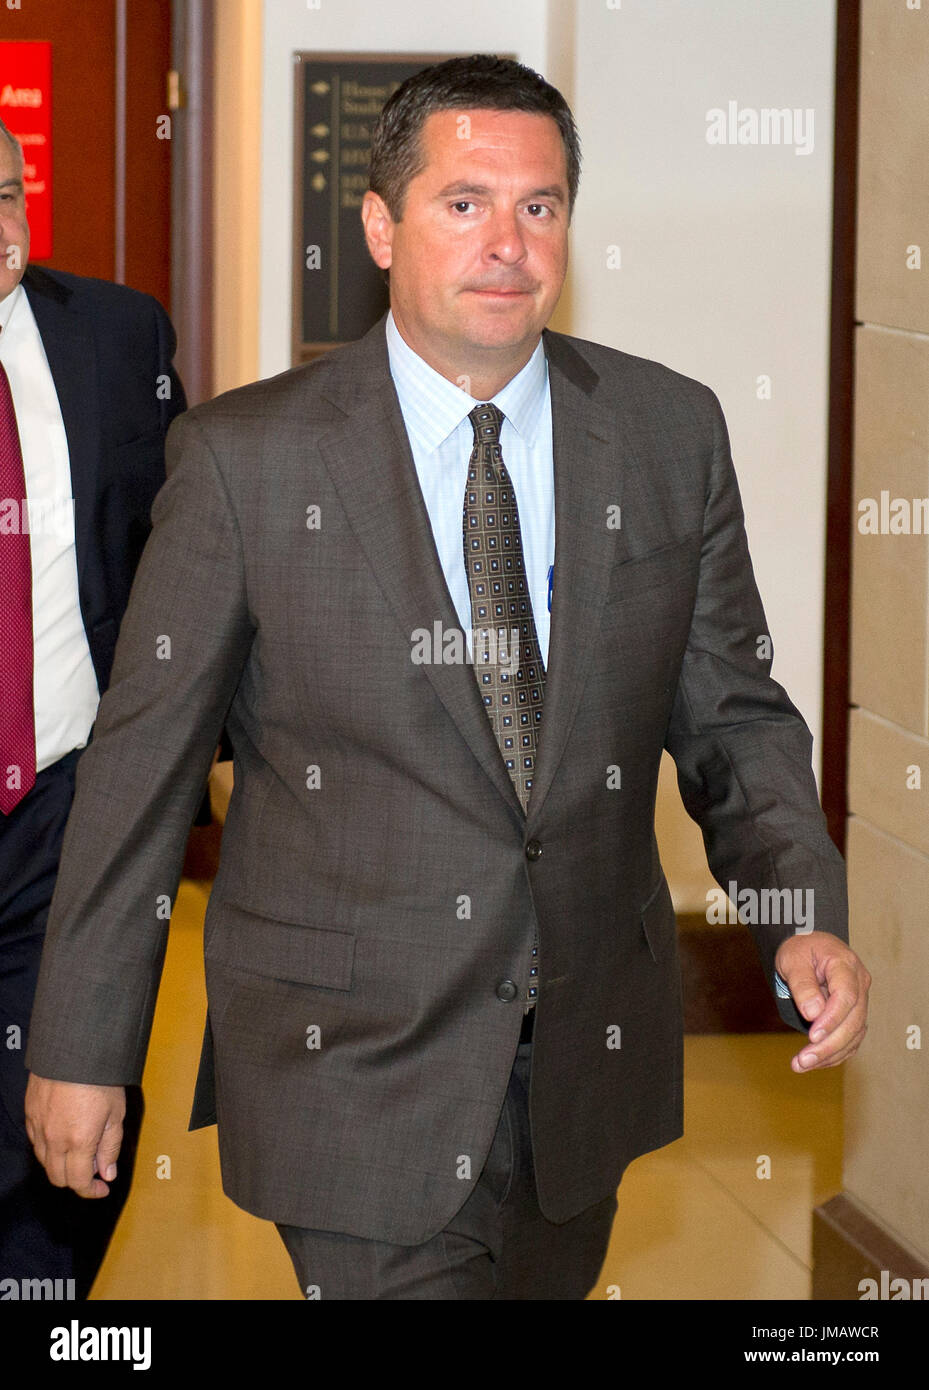 Washington, Us. 25th July, 2017. United States Representative Devin Nunes (Republican of California) departs after hearing testimony by Trump senior advisor Jared Kushner before the US House Select Committee on Intelligence on Kushner's role meeting the Russians in relation to the 2016 US Presidential election on Capitol Hill in Washington, DC on Tuesday, July 25, 2017. Credit: Ron Sachs/CNP (RESTRICTION: NO New York or New Jersey Newspapers or newspapers within a 75 mile radius of New York City) - NO WIRE SERVICE - Photo: Ron Sachs/Consolidated/dpa/Alamy Live News Stock Photo